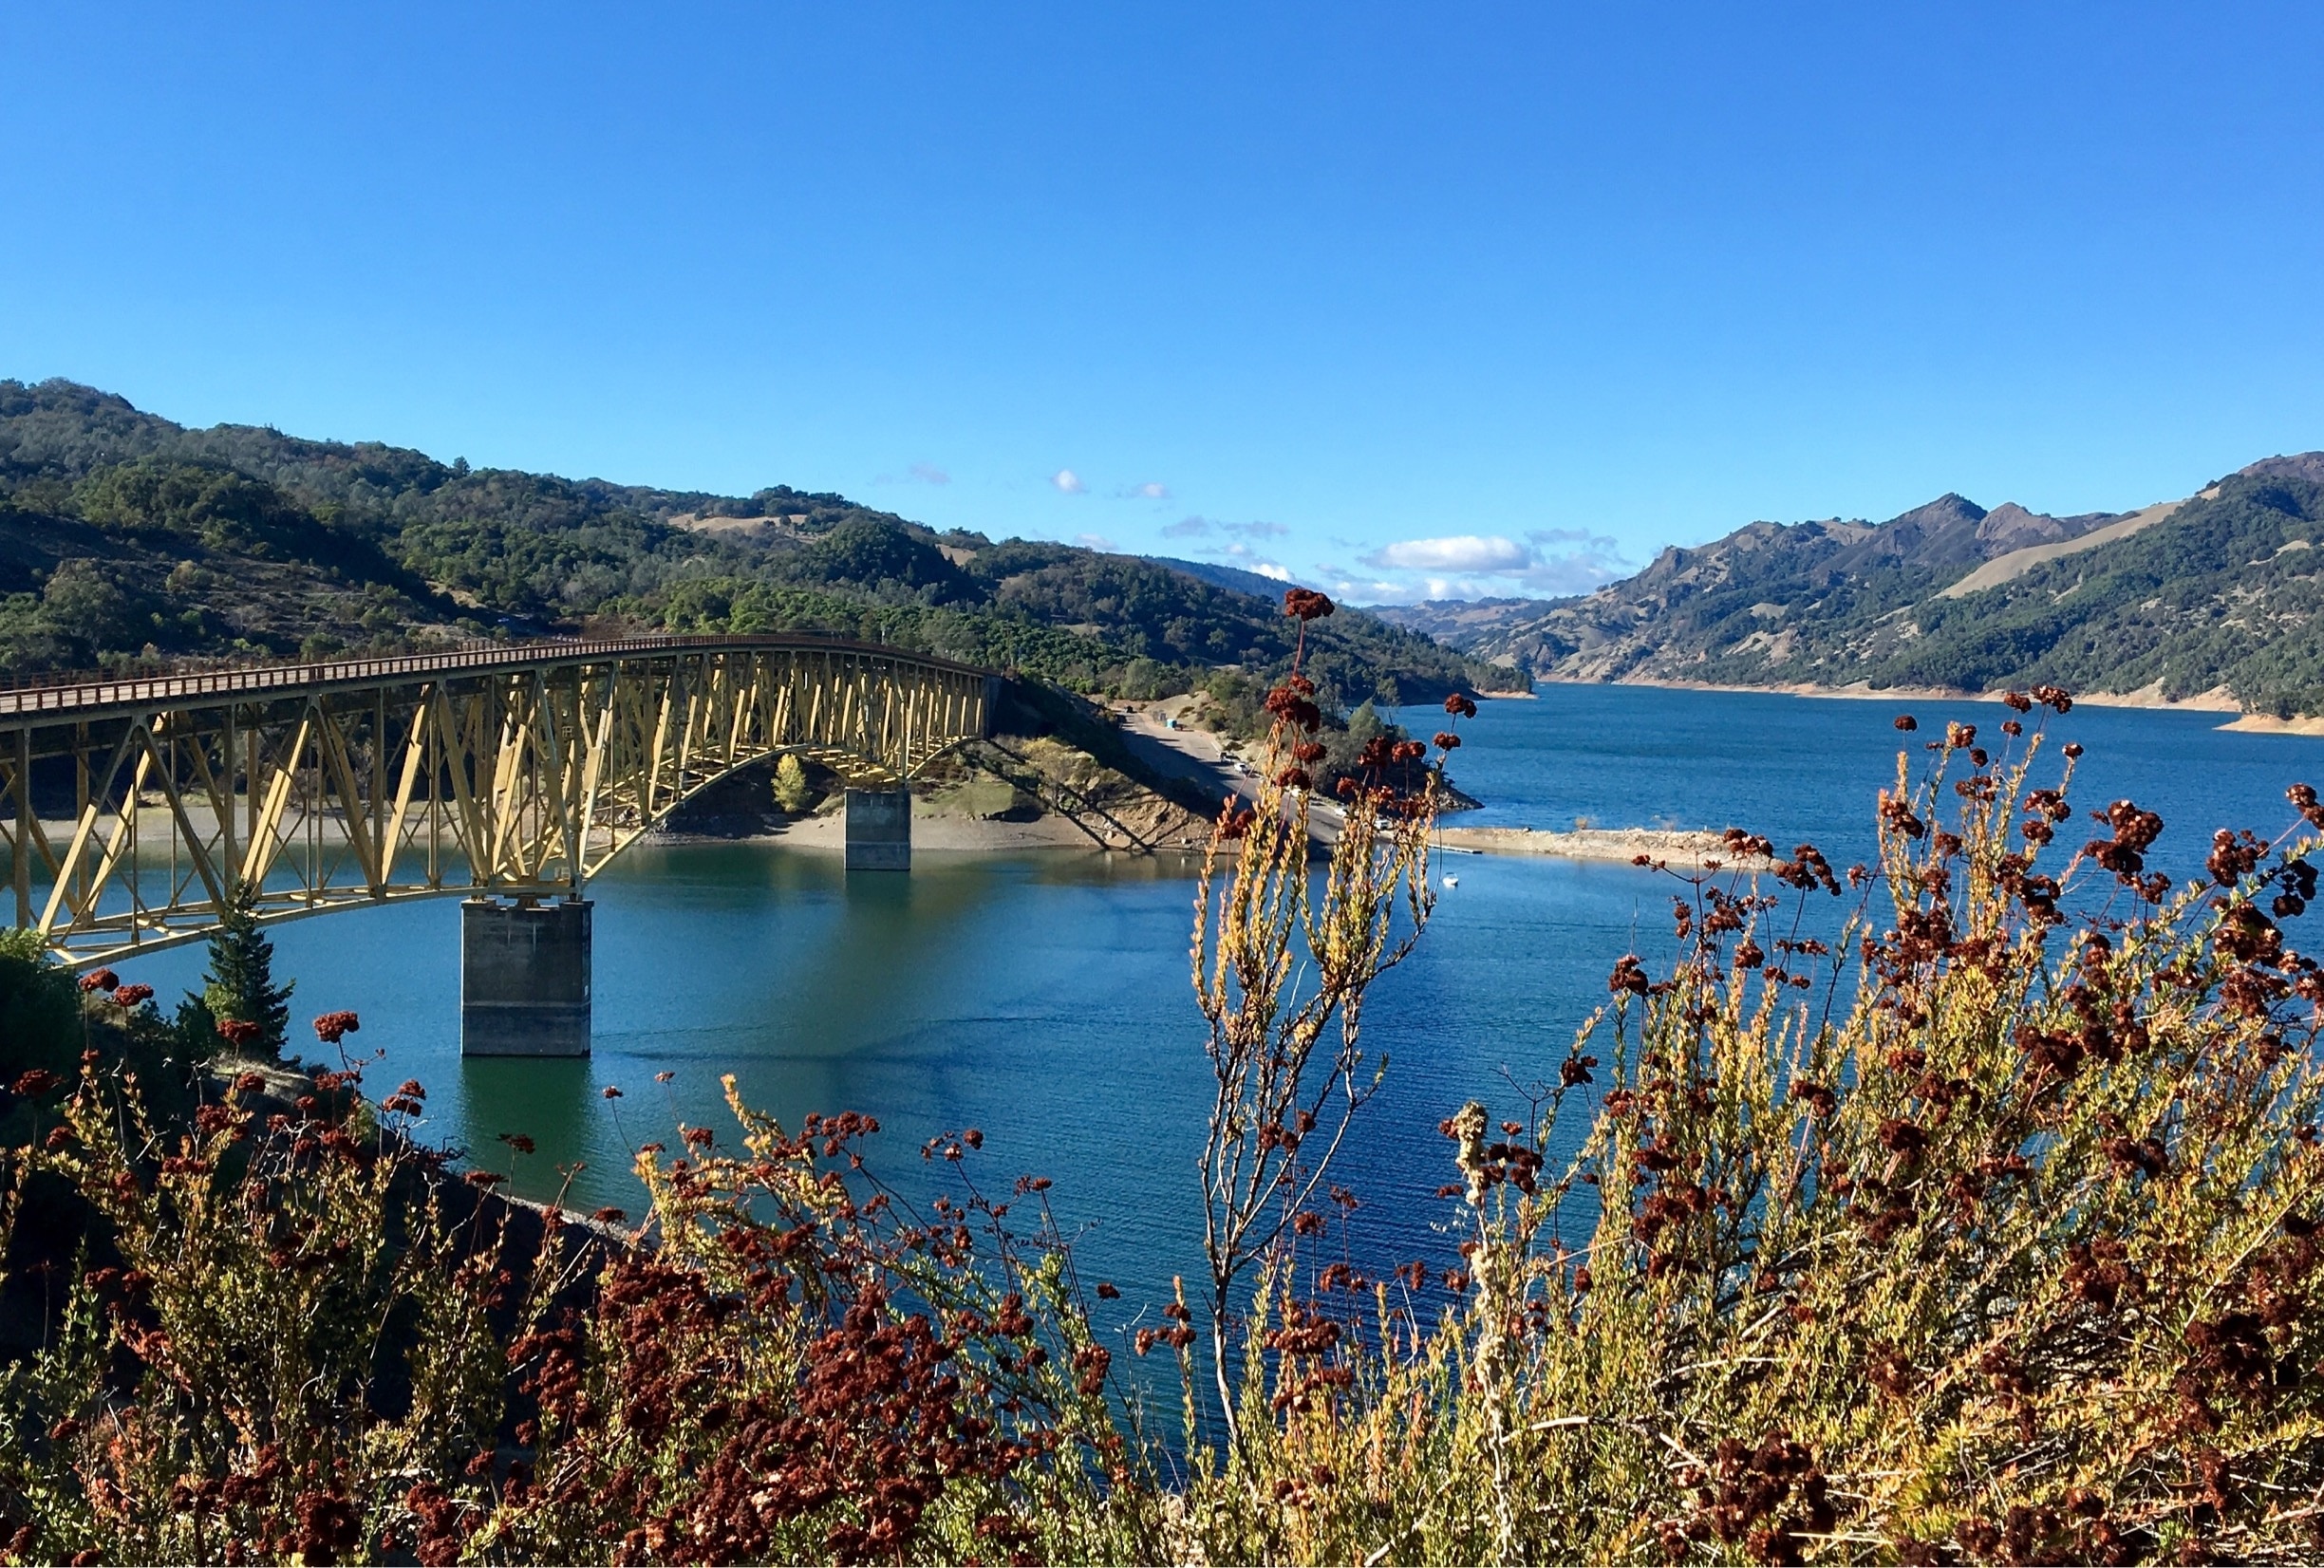 Pretty, clear day at Lake Sonoma. 

This is a man made reservoir in the middle of Sonoma wine country. An old town complete with a hot springs resort was flooded during the process of creating it.  Coho Salmon and Steelhead Trout are bred at the fishery here. 
#Bridges
#Blue #California #Water